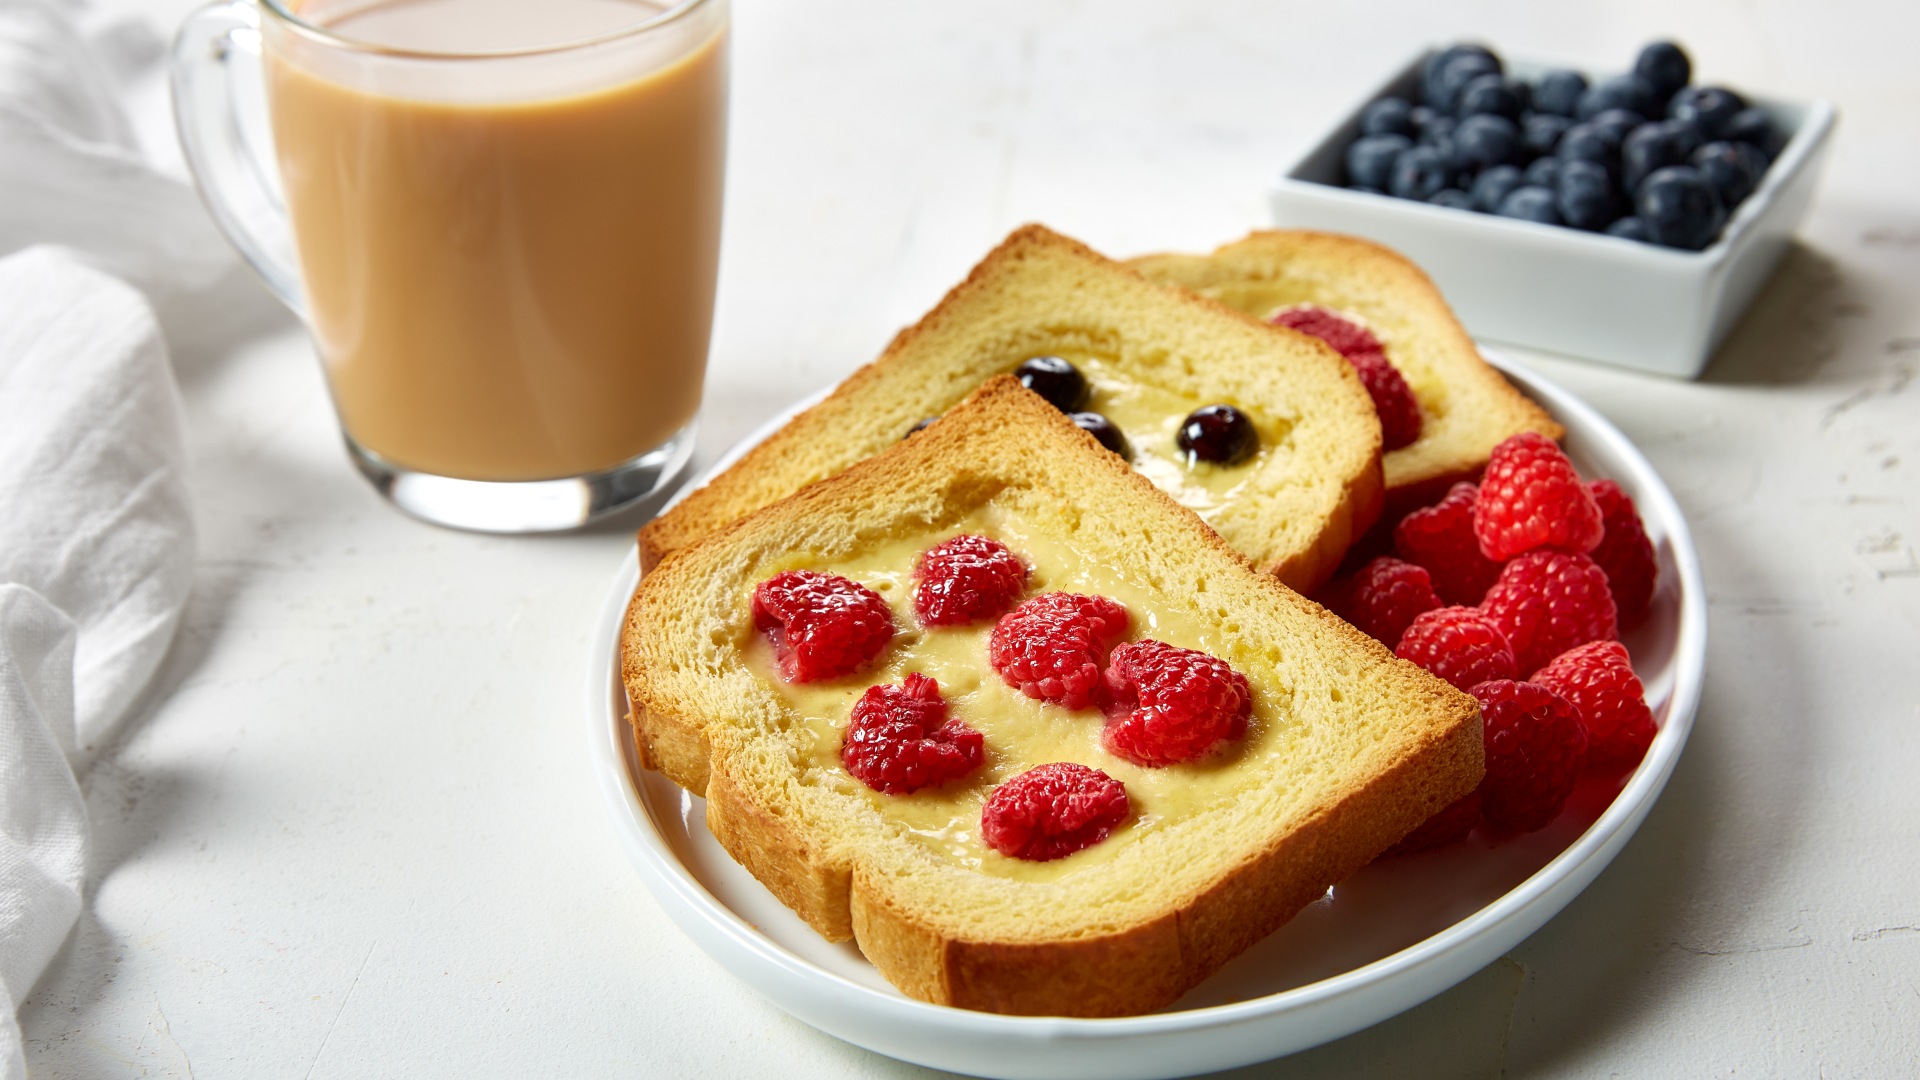 Plate with 3 pieces of toast with yogurt custard and fruit baked onto each slice. Glass of whitened coffee on the side